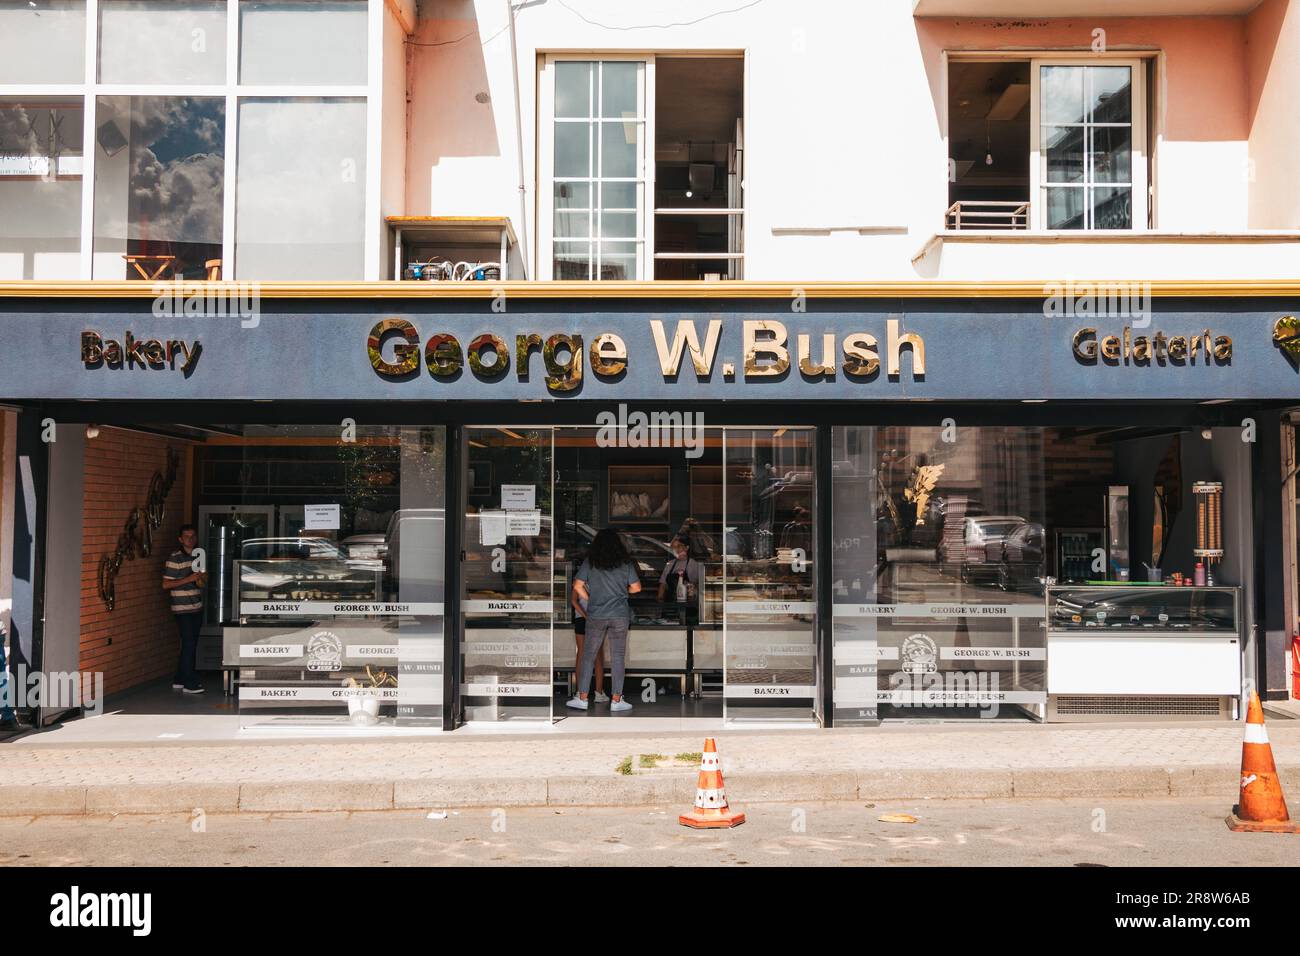 The George W. Bush bakery in Fushë Krujë, Albania. He was the first U.S. president to visit Albania post-communism, and stopped by this small town Stock Photo